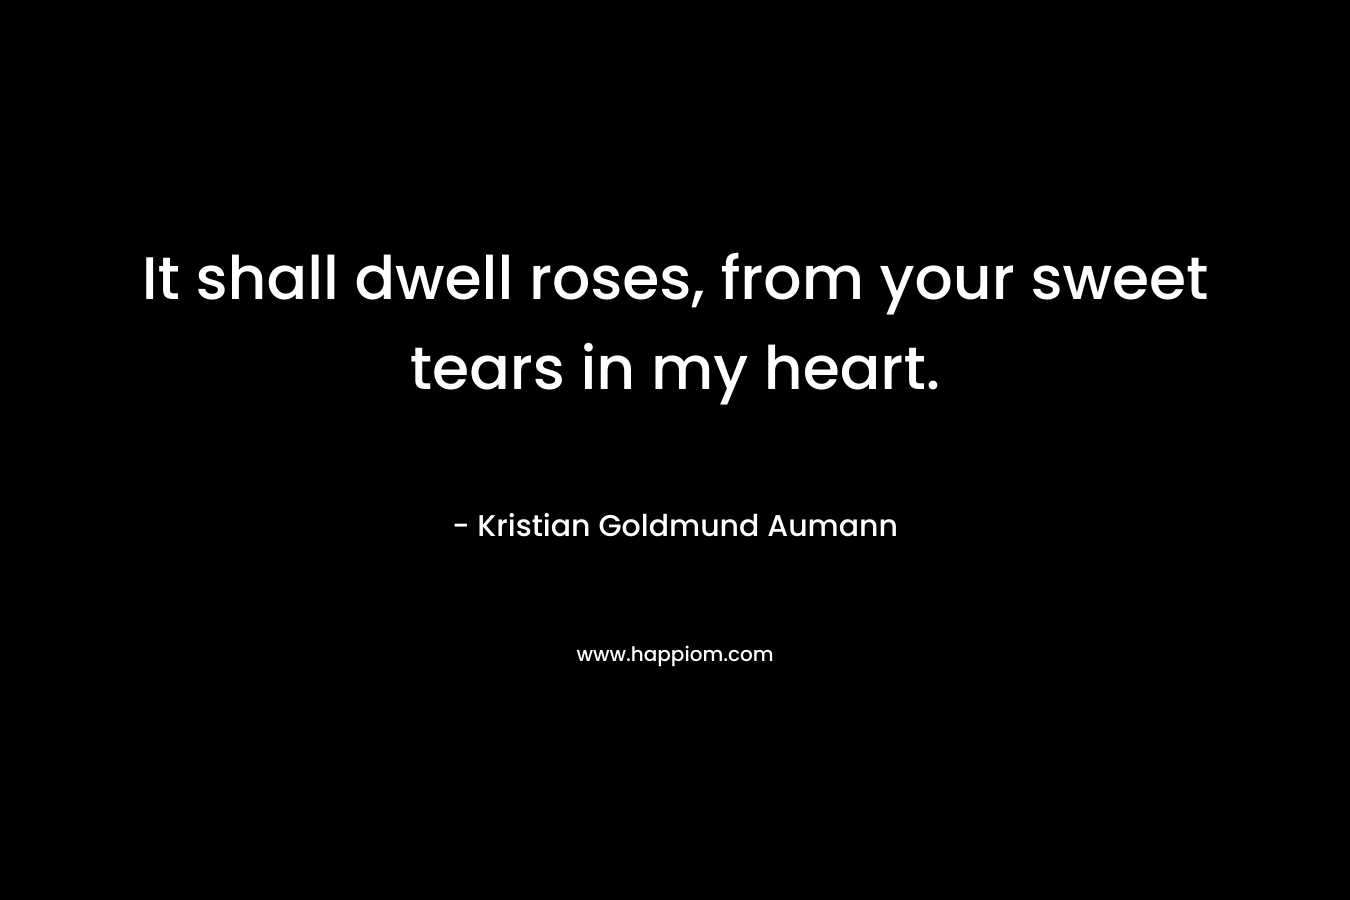 It shall dwell roses, from your sweet tears in my heart. – Kristian Goldmund Aumann